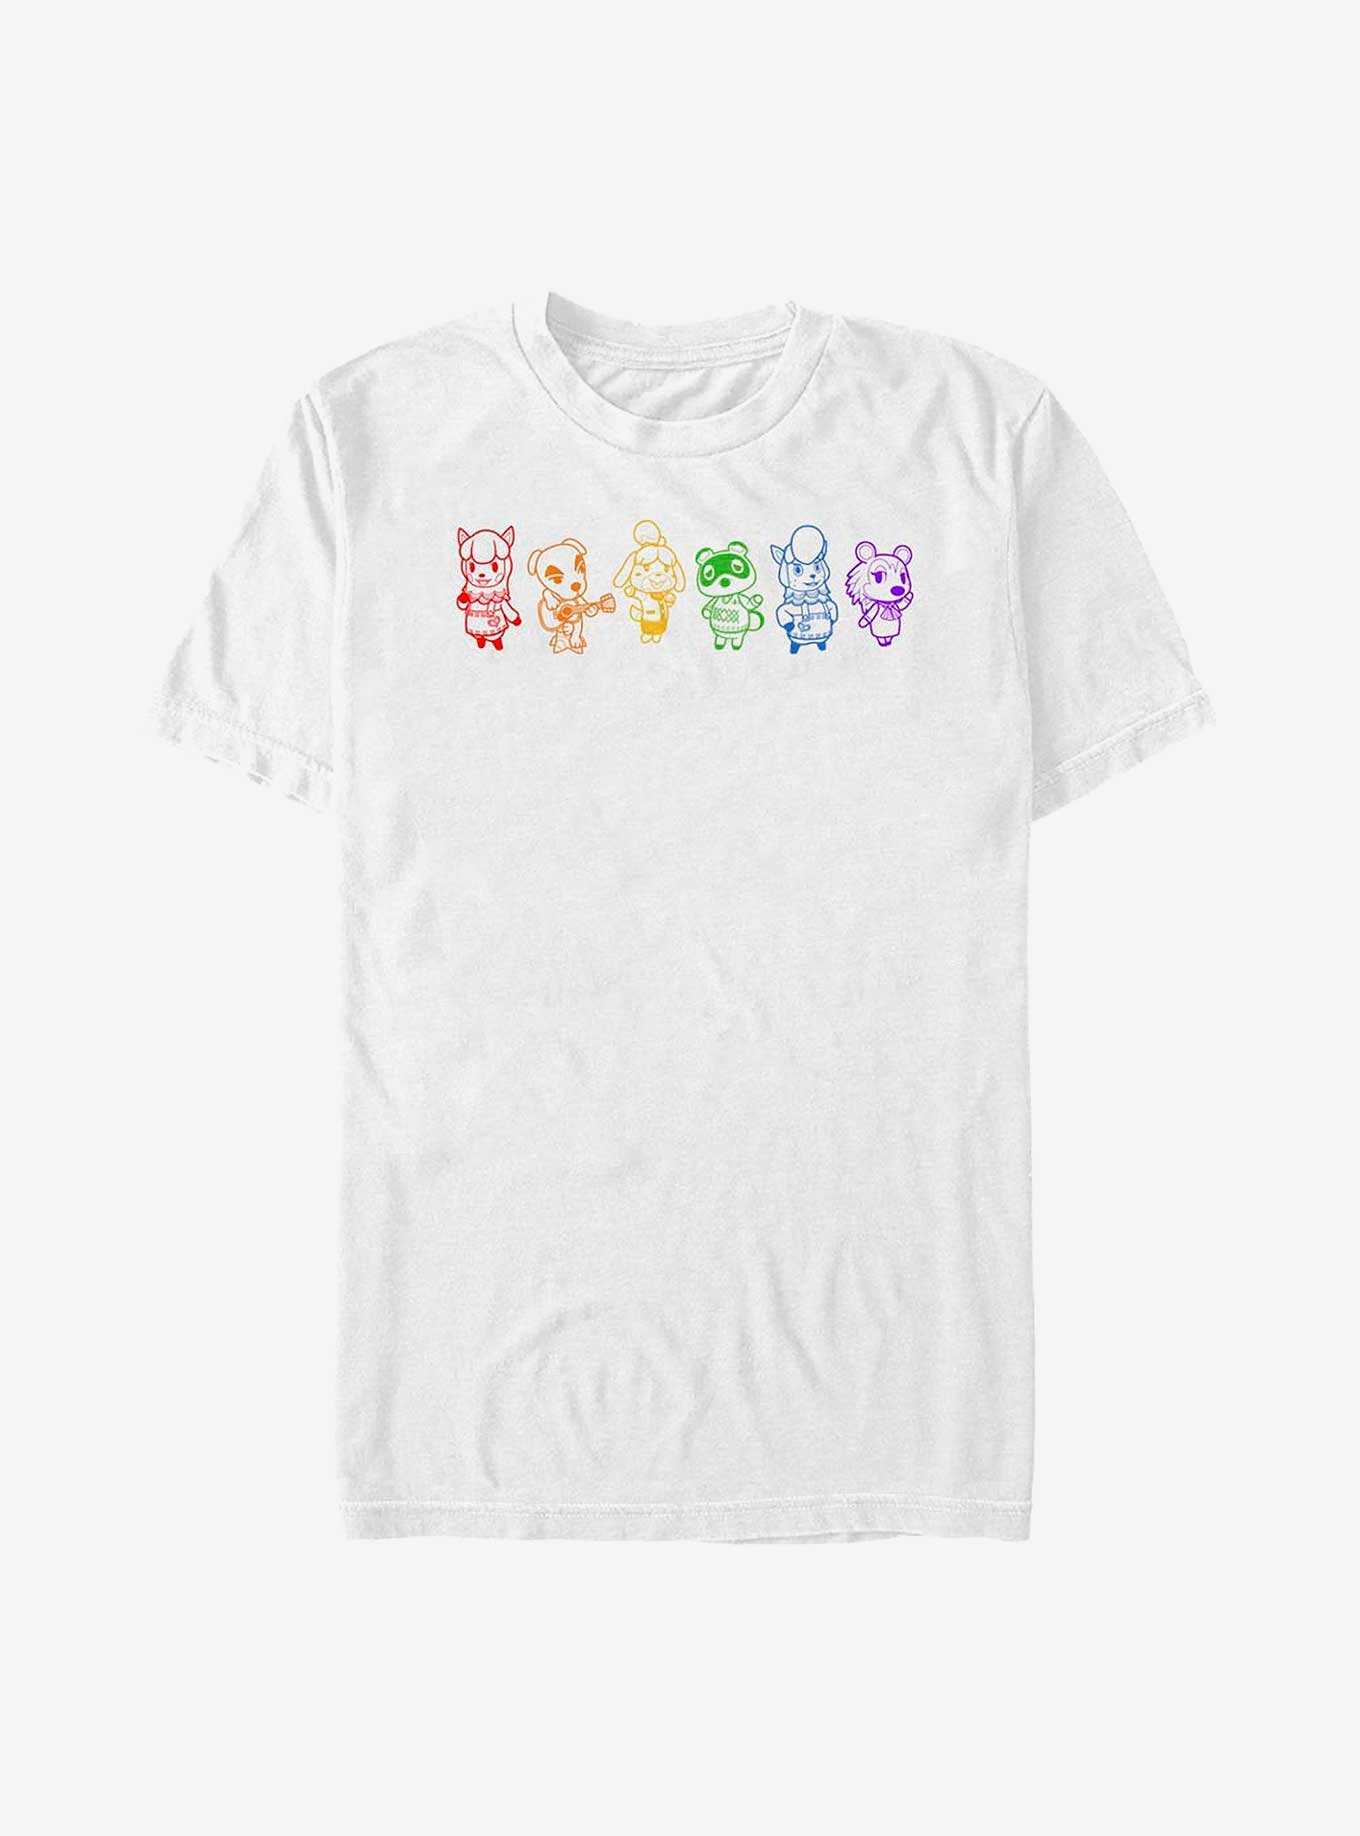 OFFICIAL Animal Crossing Shirts, Merch, & Gifts